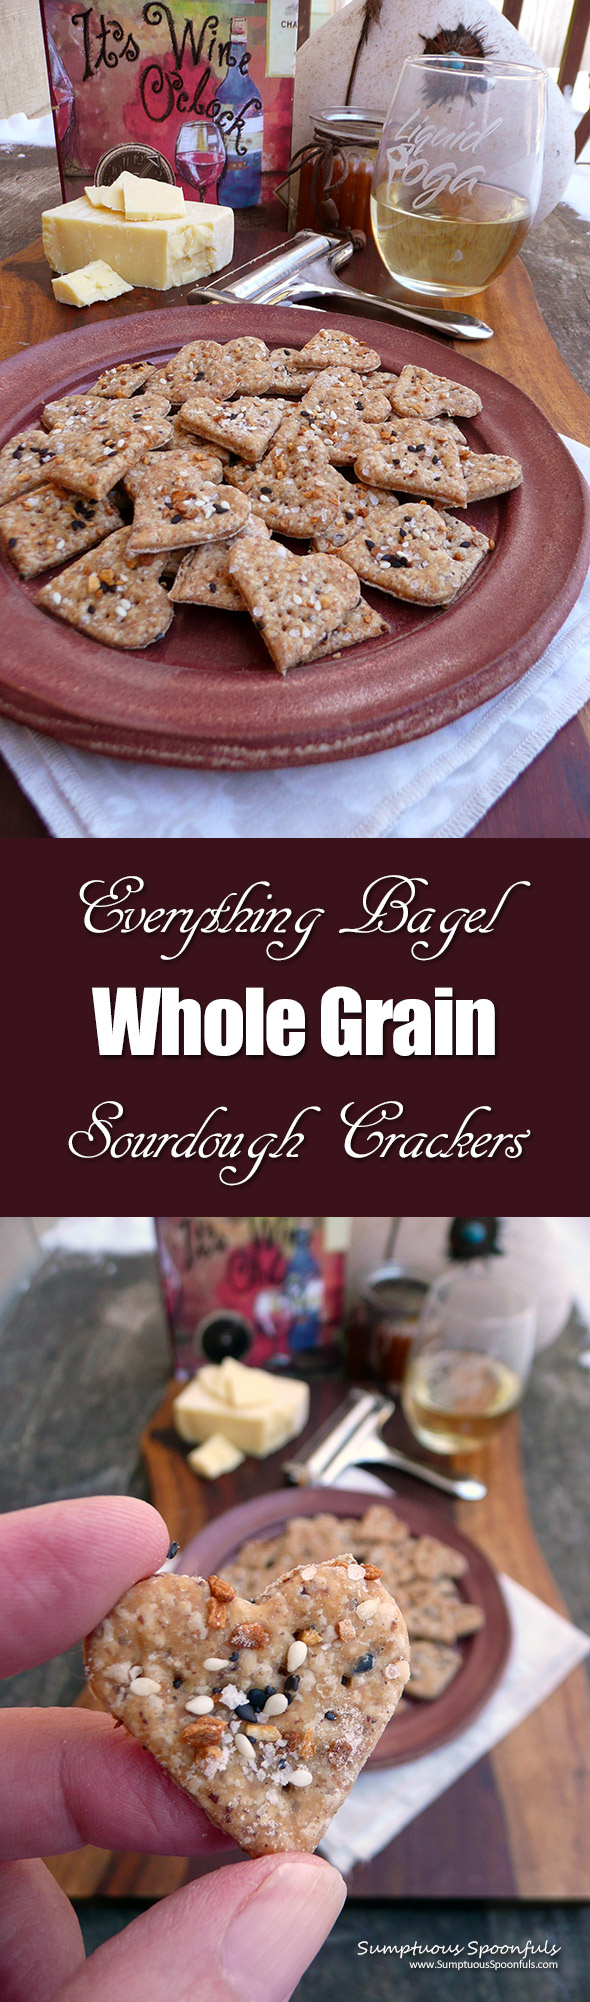 Everything Bagel Whole Grain Sourdough Crackers ~ Whole wheat flour, rye, flax with everything bagel seasoning inside and out, these crunchy crackers are addictive!